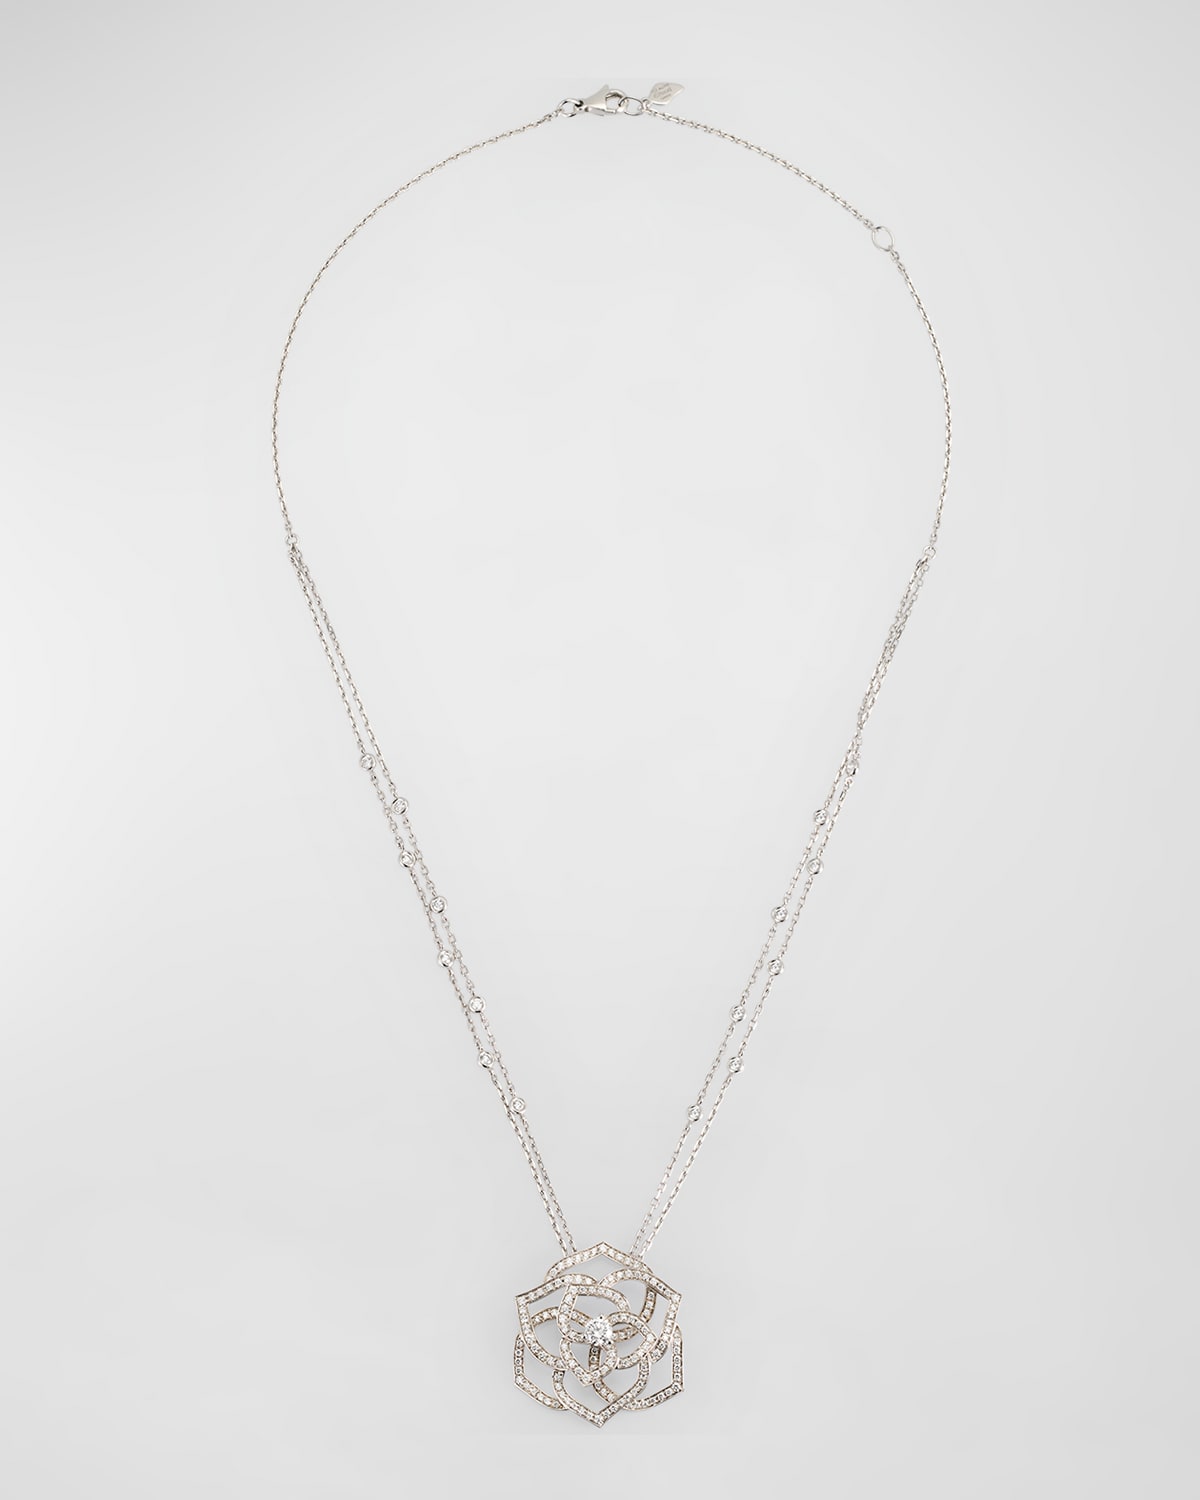 Rose Ajouree Necklace in 18k White Gold with Diamonds